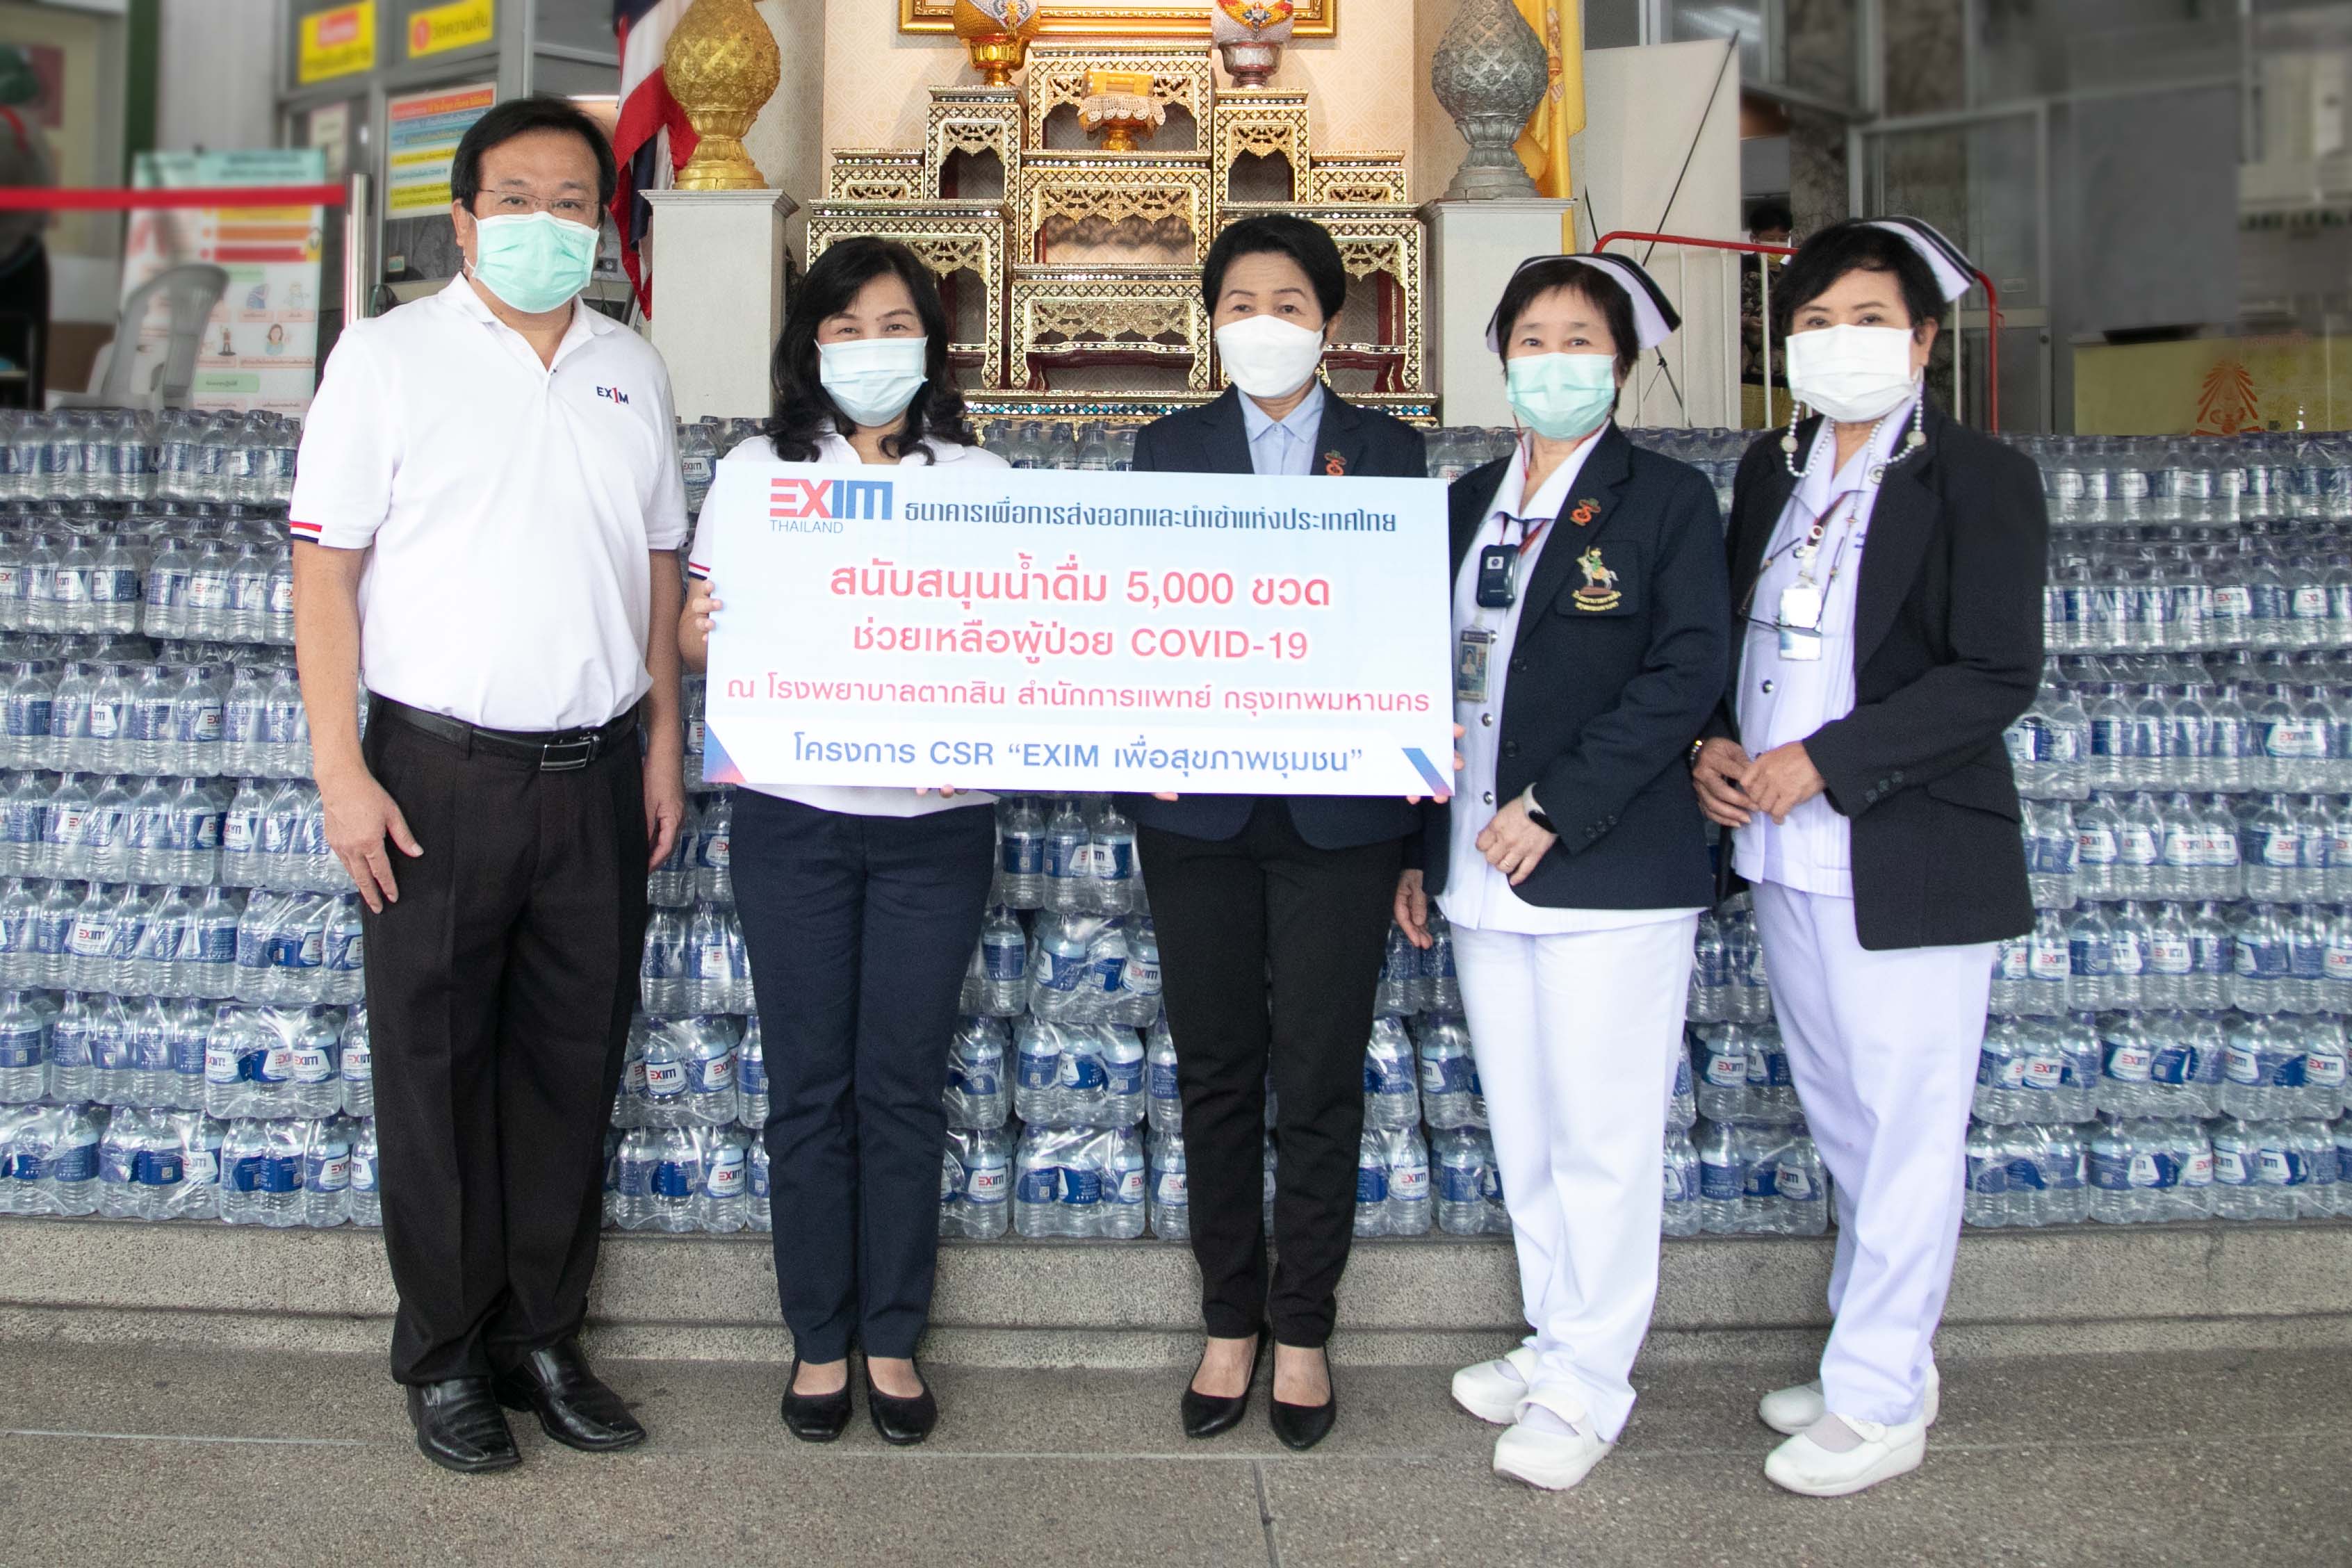 EXIM Thailand Delivers Bottled Water to Support Medical Staff  and COVID-19 Patients in Taksin Hospital